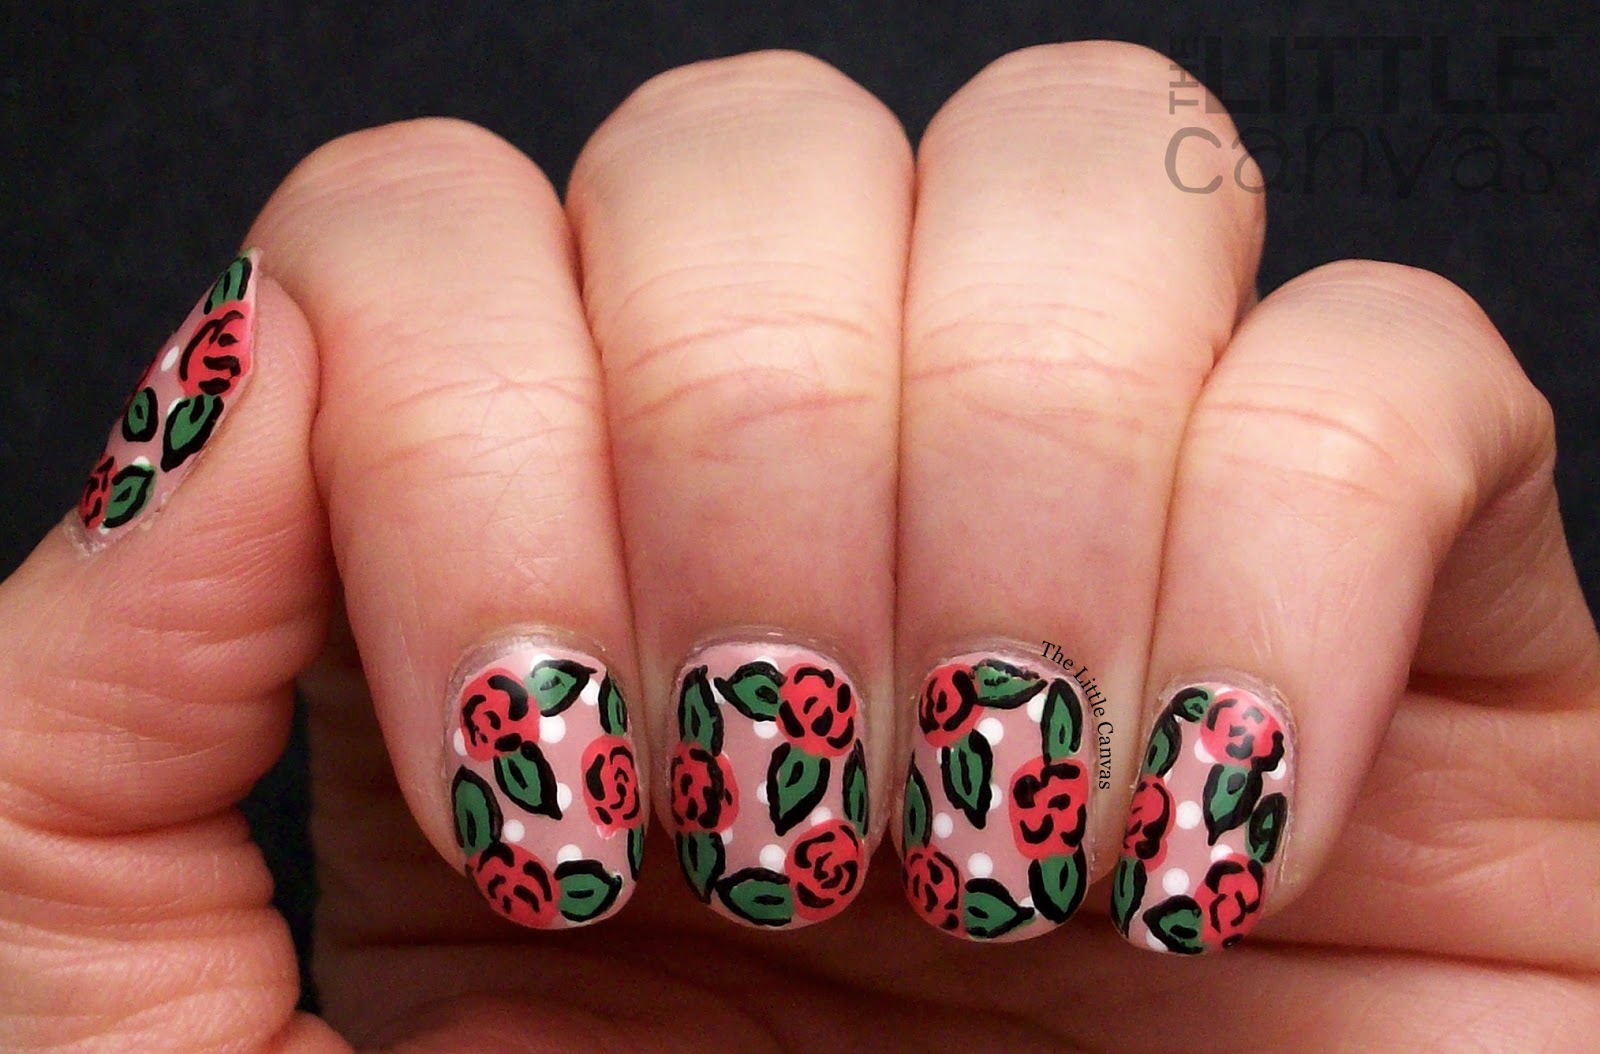 3. How to Create a Vintage Rose Manicure - wide 6